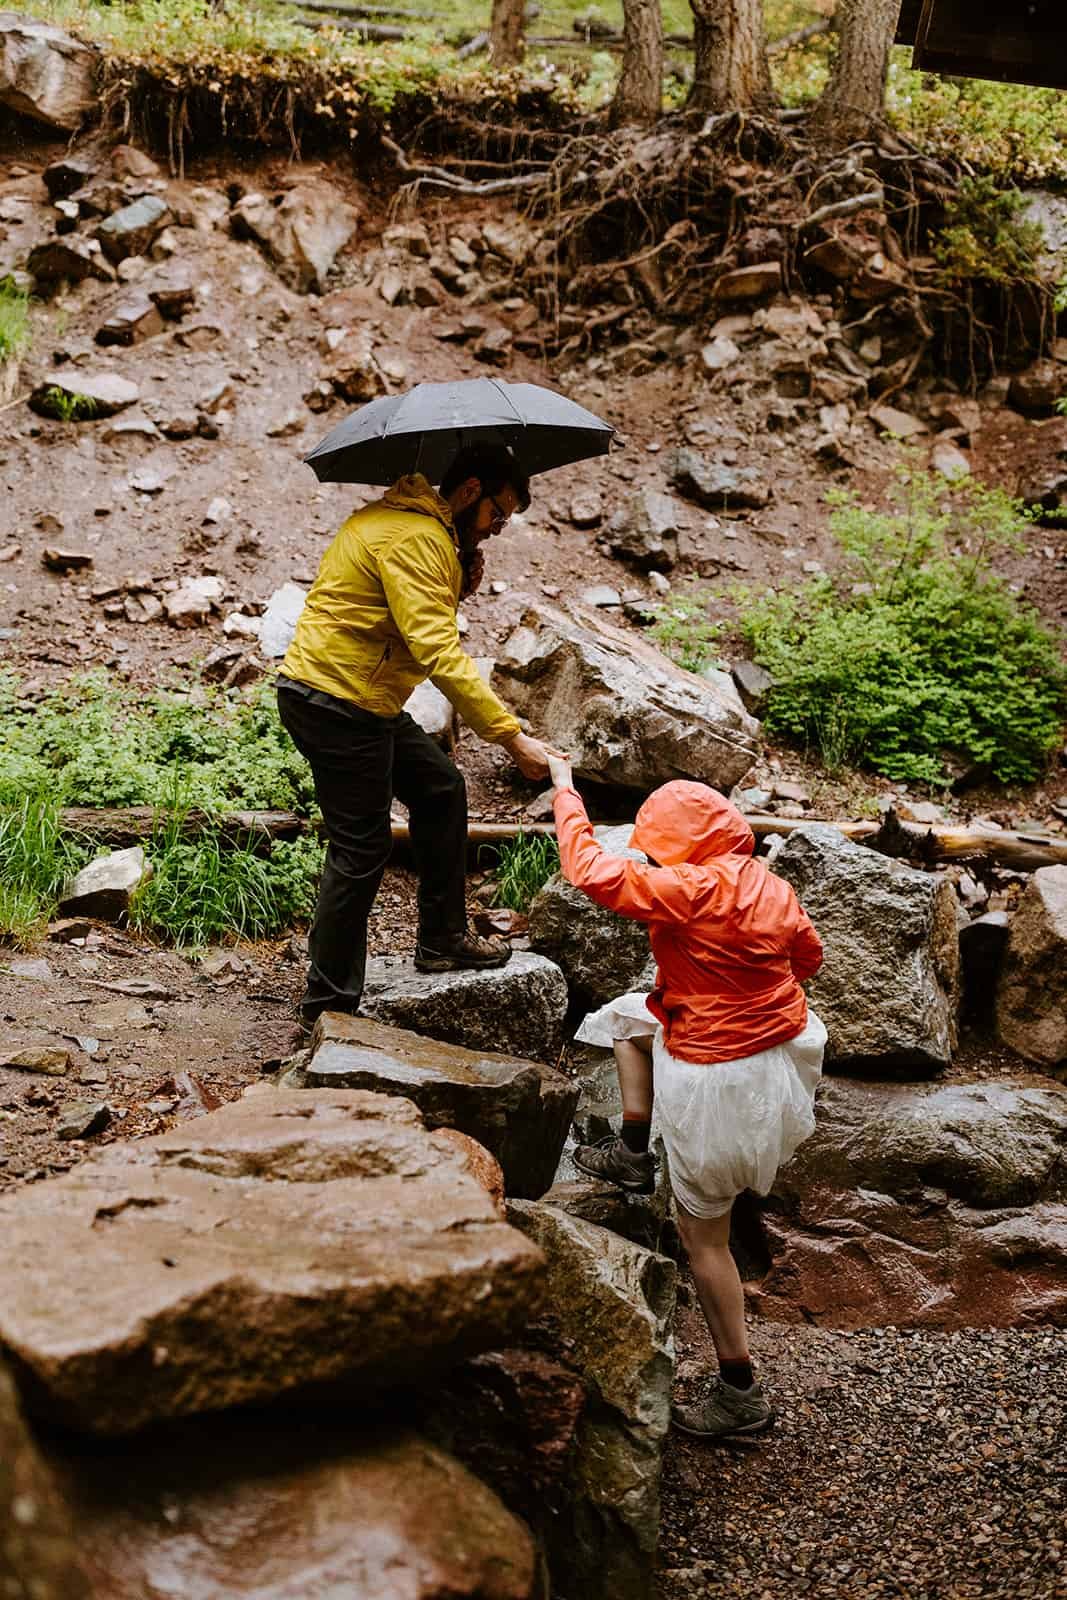 A man holding an umbrella helps a woman in a wedding dress and rain jacket up a rock ledge